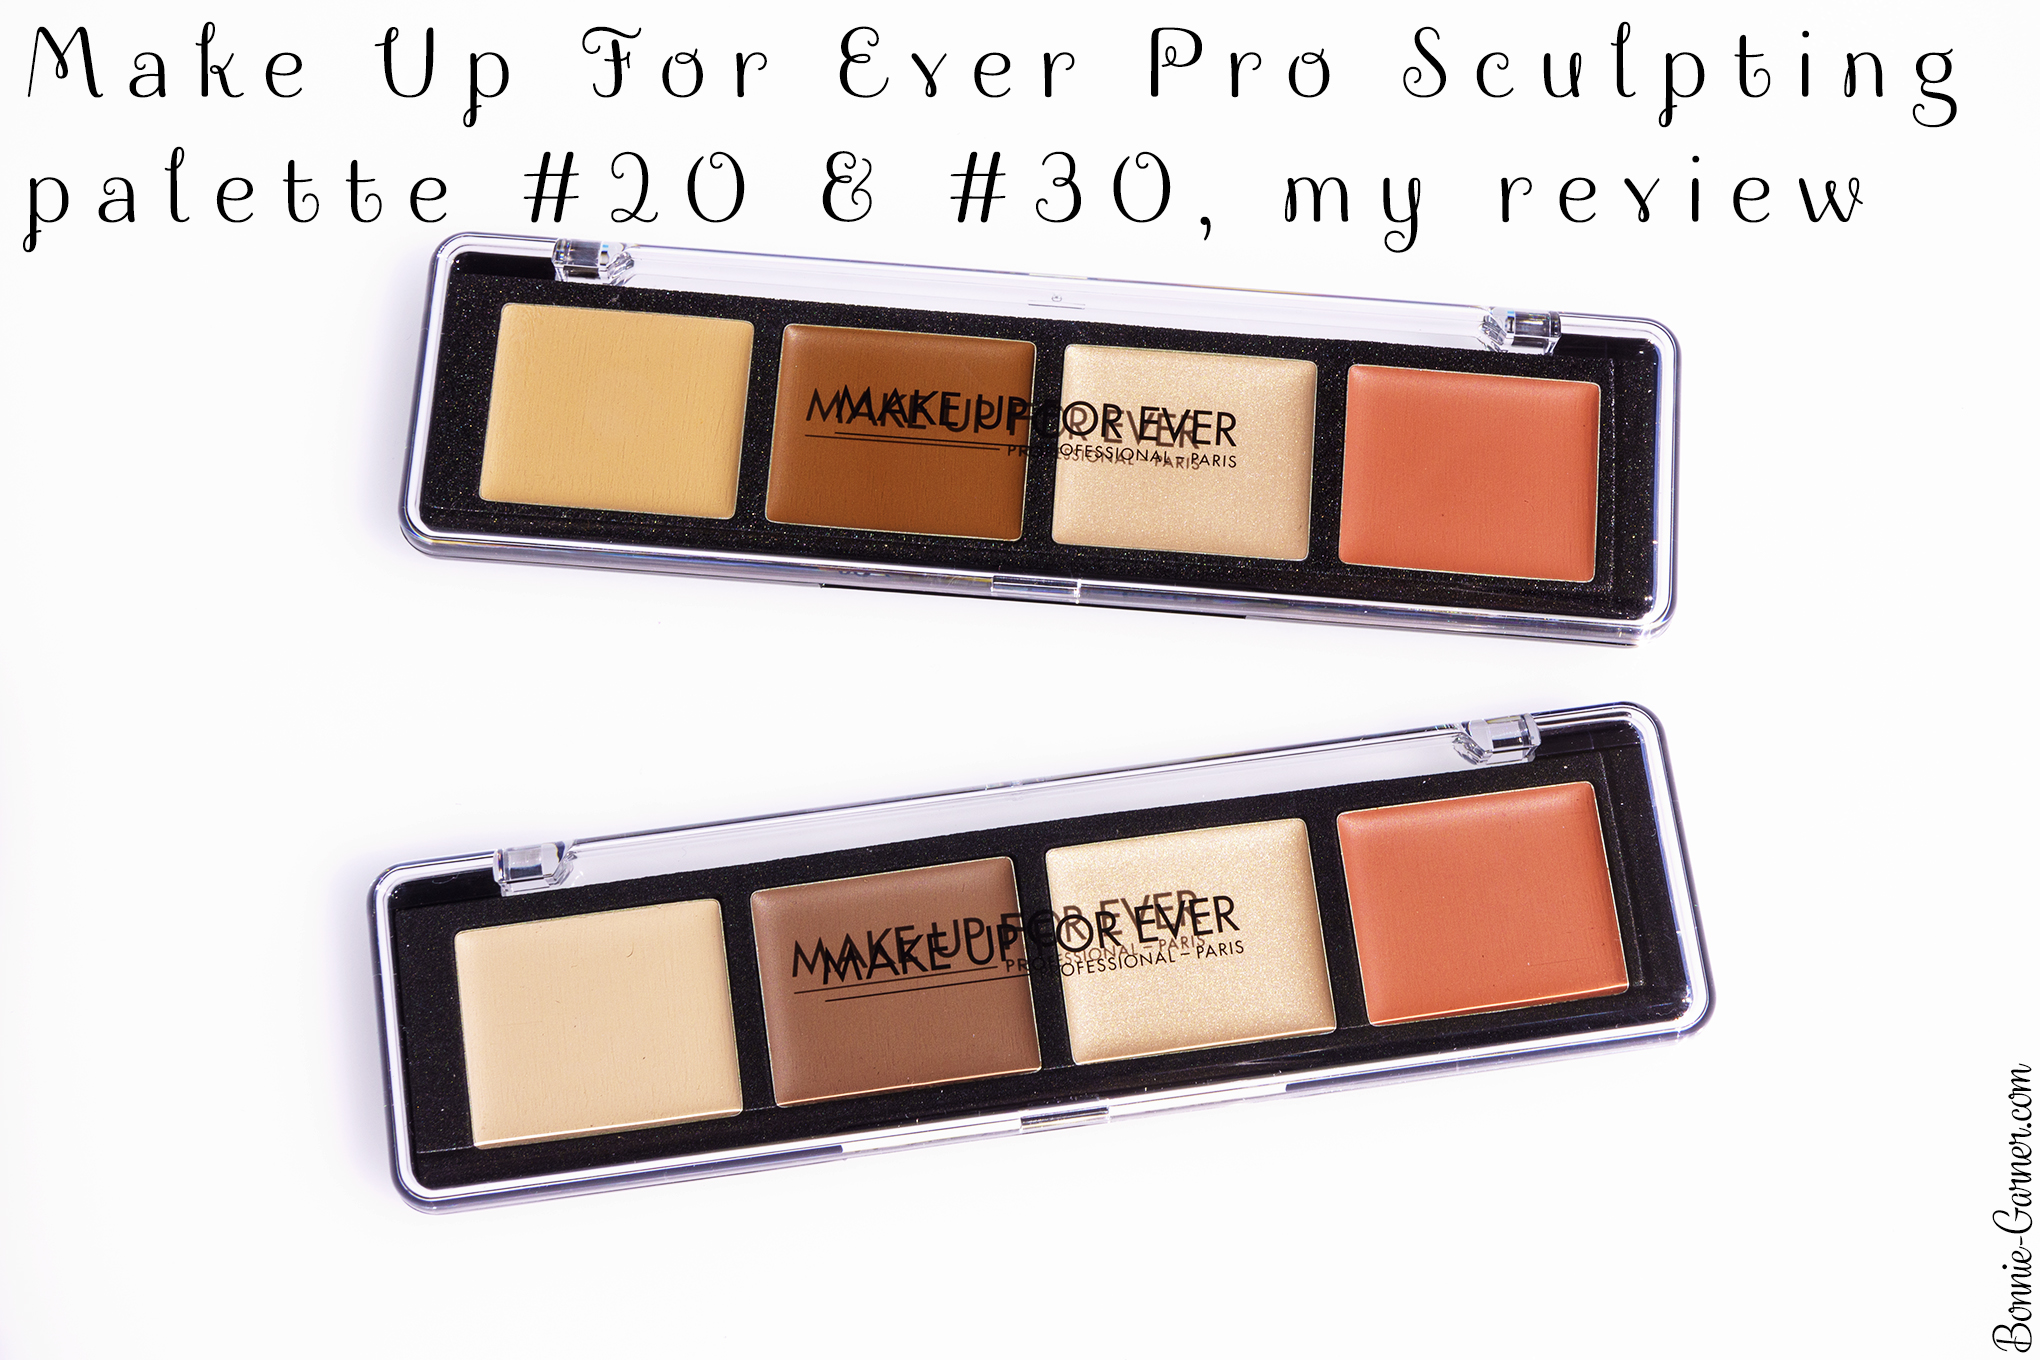 Make Up For Ever Pro Sculpting Palette #20 & #30, my review